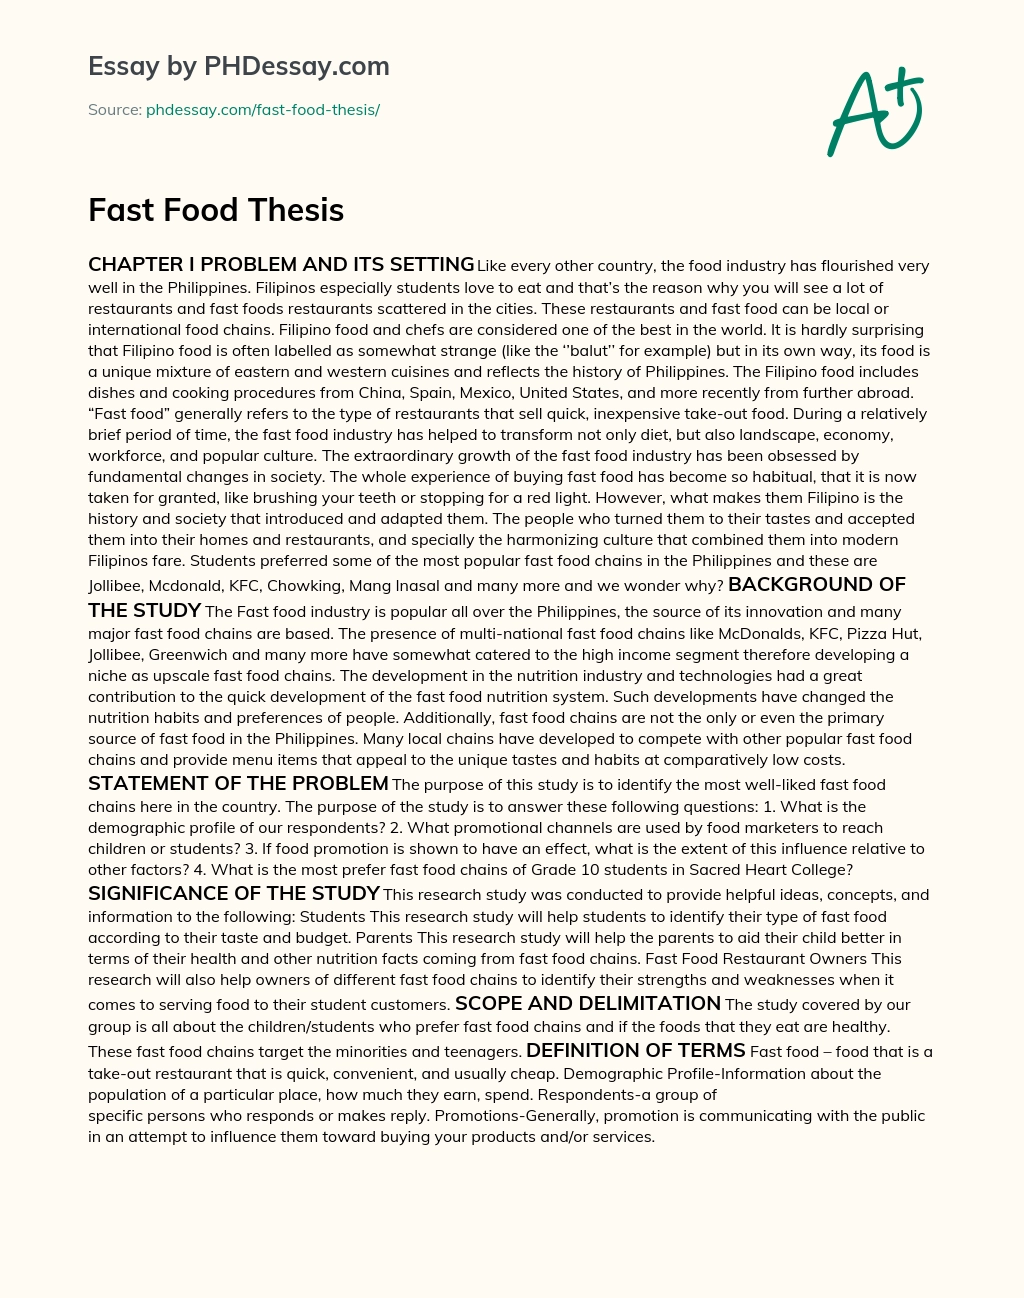 Fast Food Thesis essay